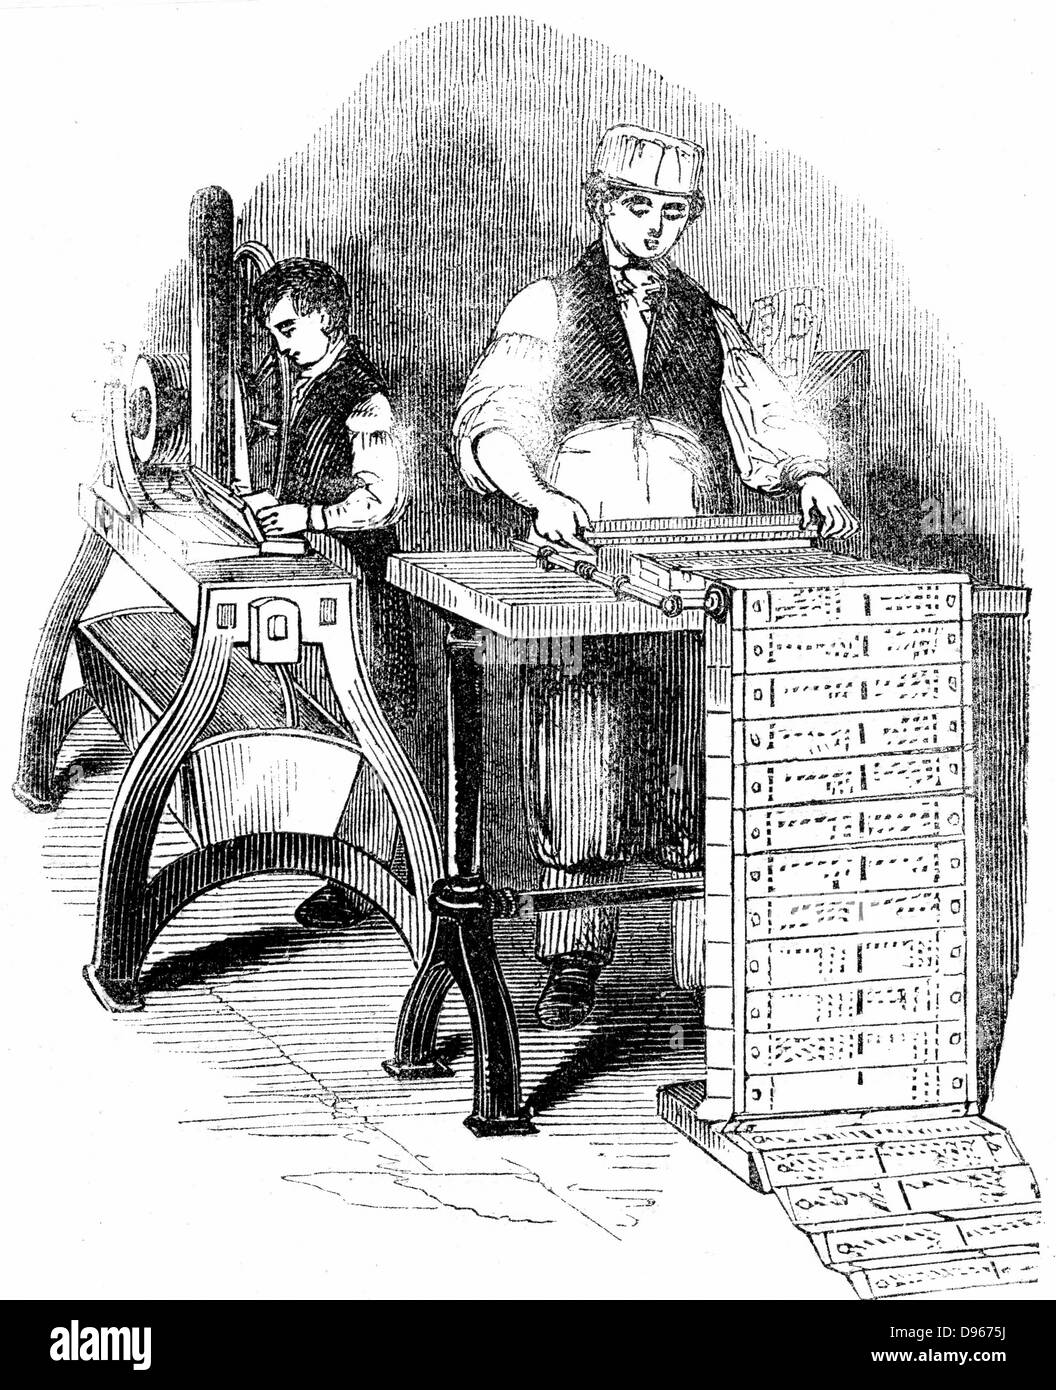 Preparing punched cards for a Jacquard loom. Card for each weft thread of pattern. 400-800 normal, but sometimes 24,000 were worked. From George Dodd 'The Textile Manufactures of Great Britain', London, 1844. Engraving Stock Photo